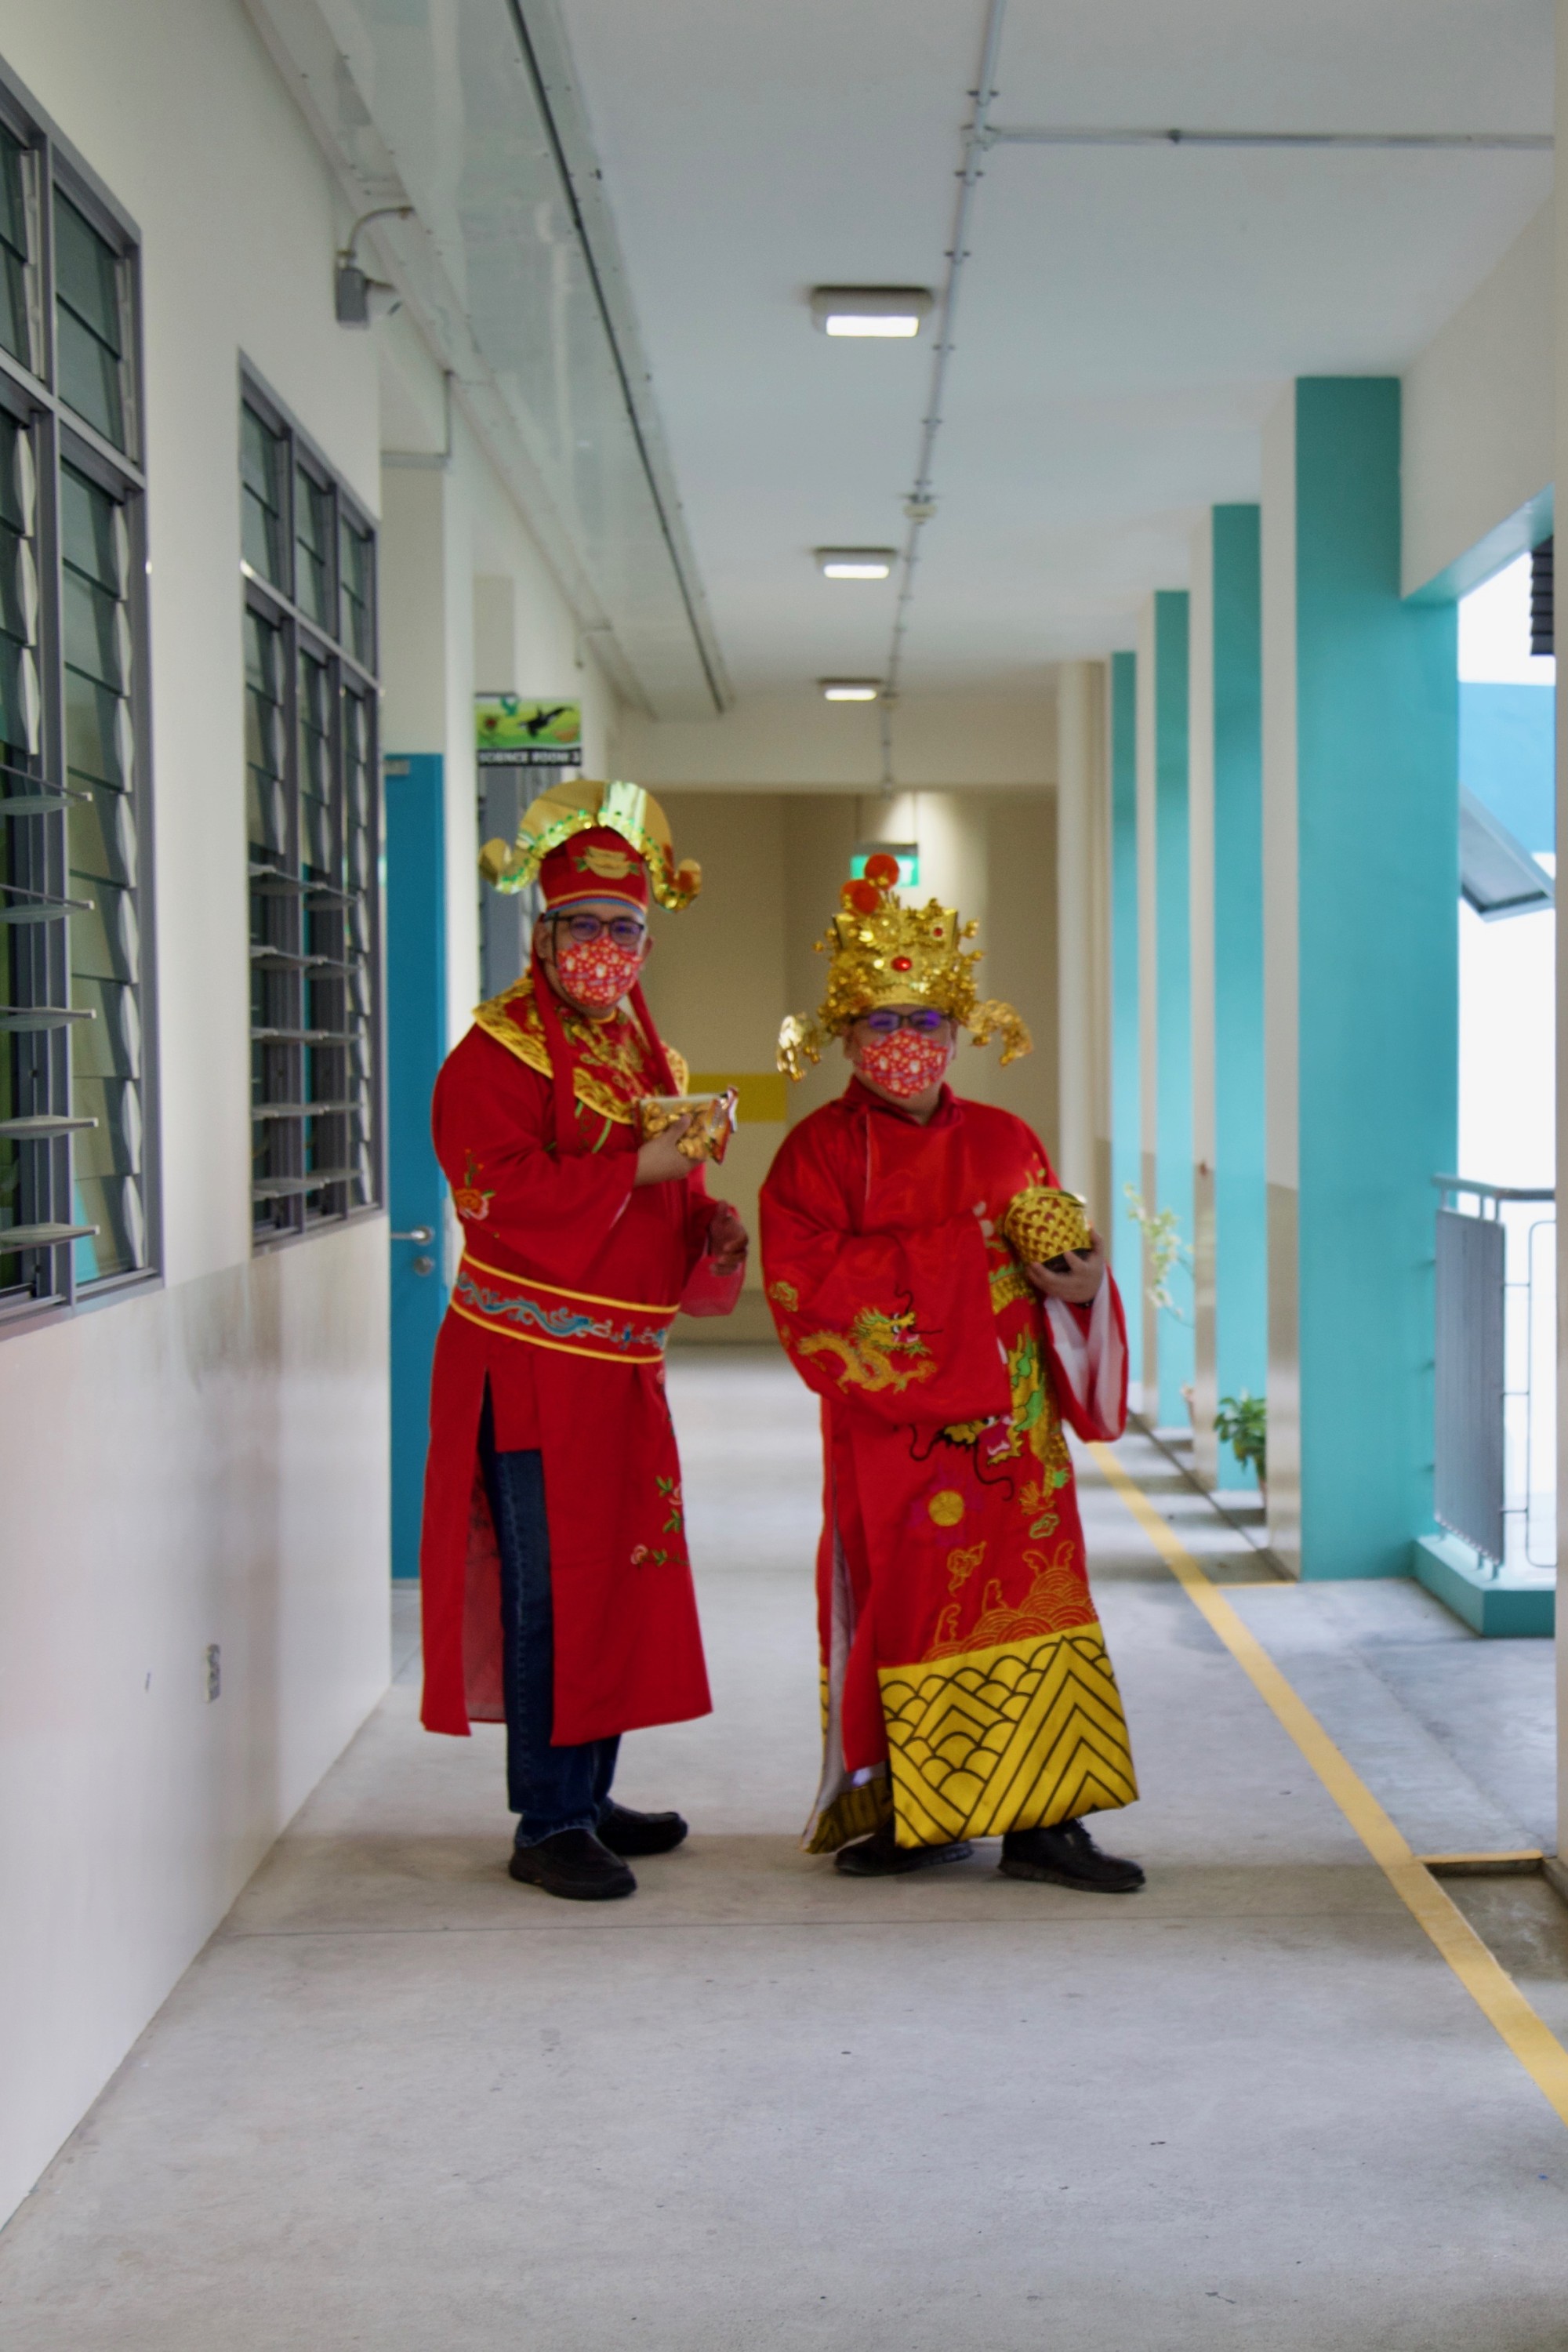 Teachers dressed up as “God of Fortunes” sharing their blessings with students